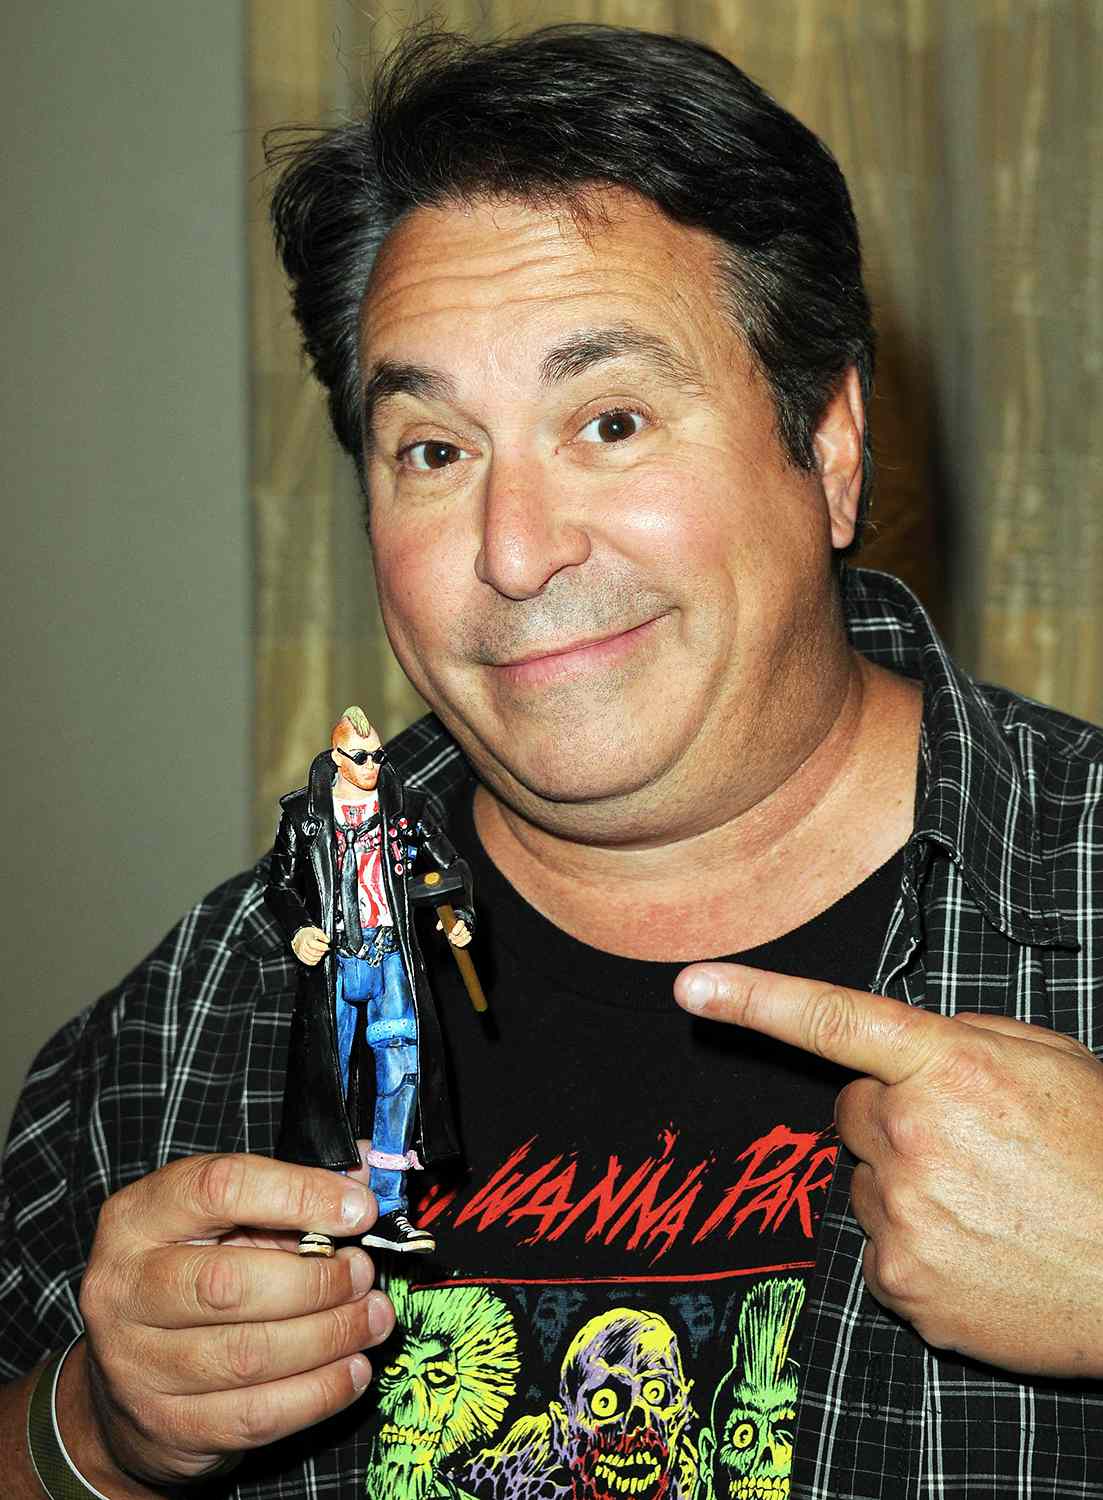 Brian Peck participates in the 2012 Monsterpalooza held at Burbank Airport Marriott on April 15, 2012 in Burbank, California.